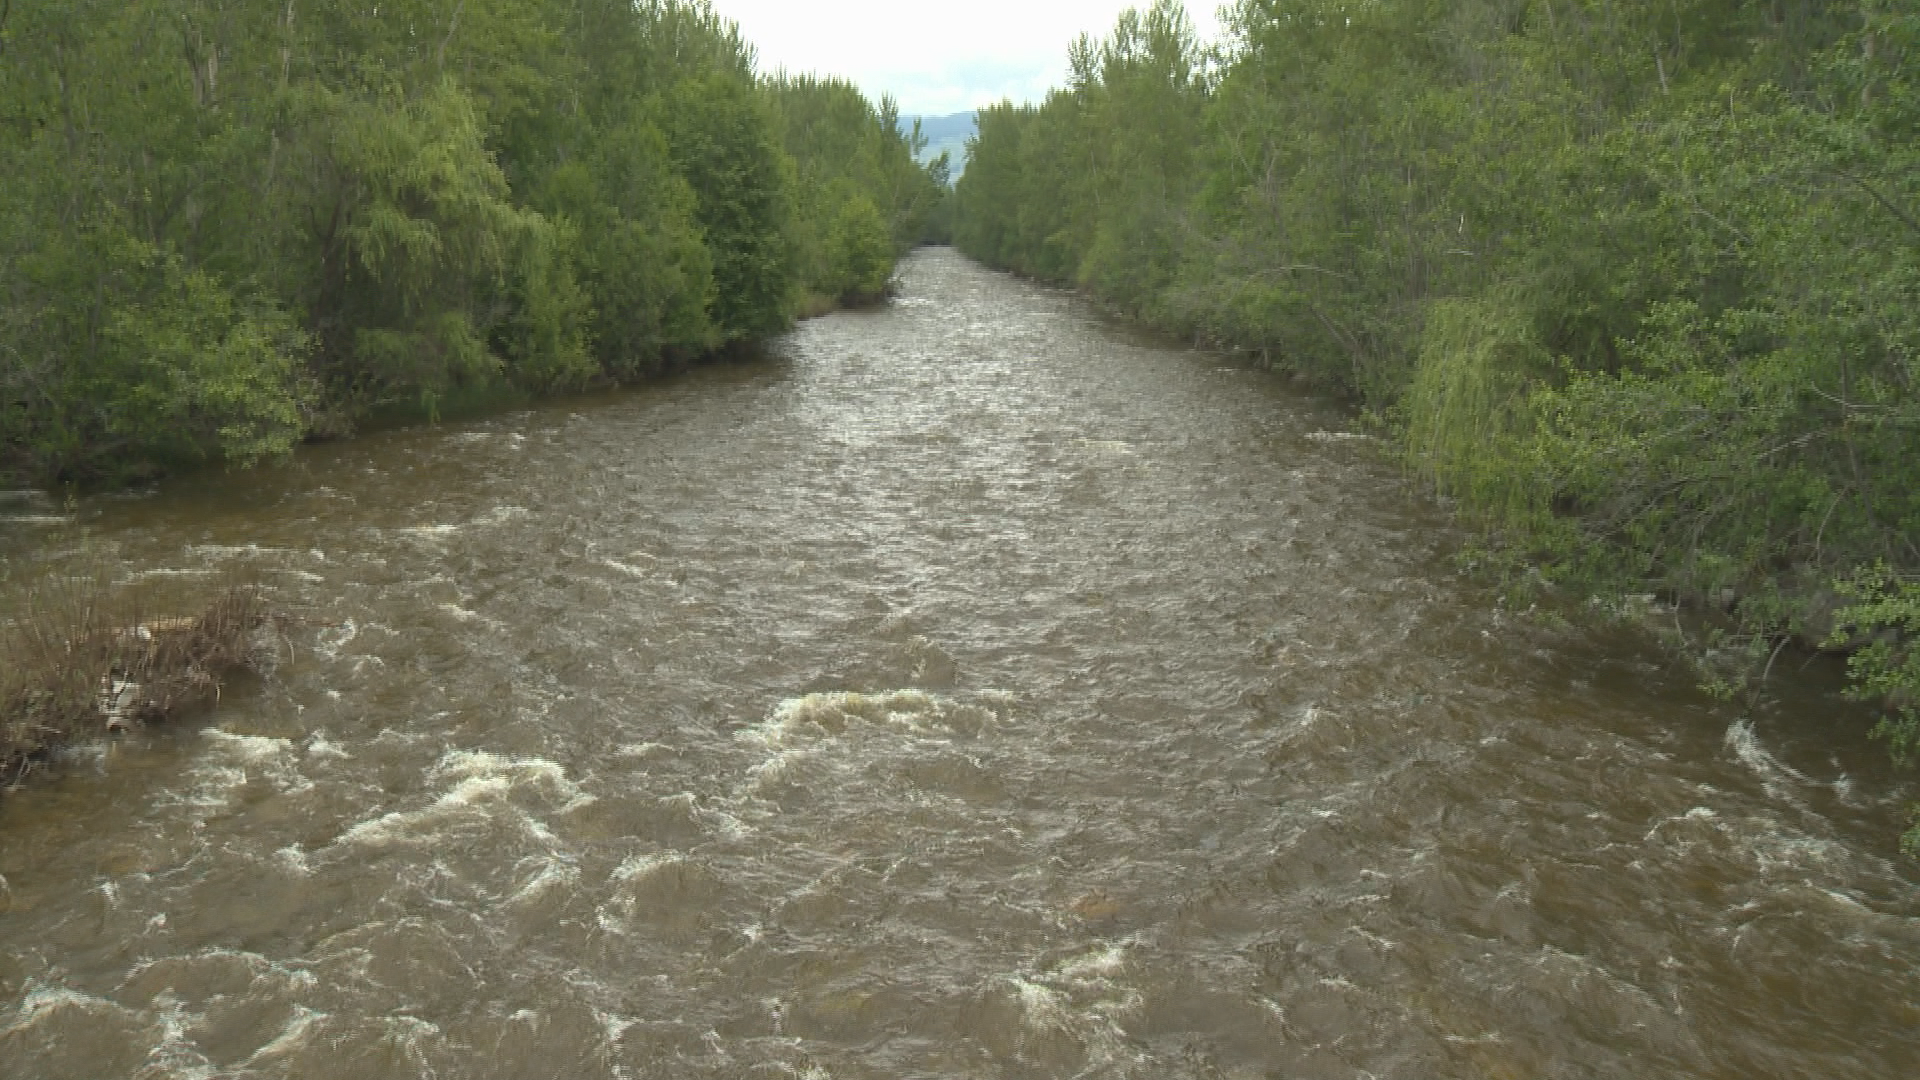 The Ministry of Forests says Mission Creek’s flow peaked on July 4 at 55 cubic metres per second and is currently flowing at 37 cubic metres per second.